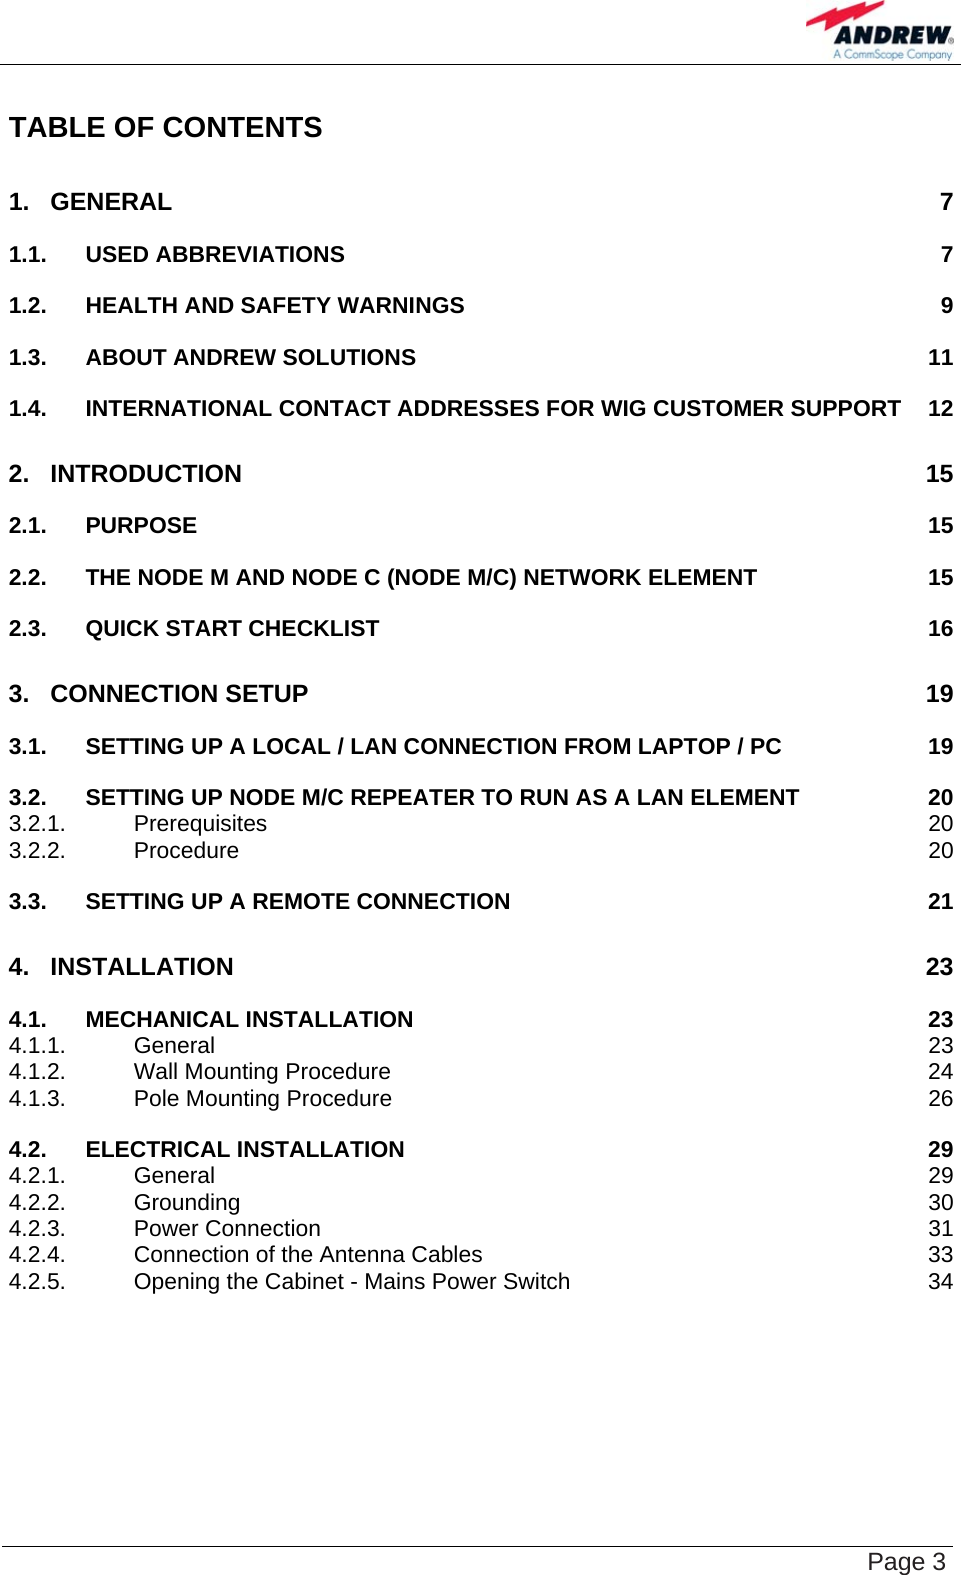    Page 3 TABLE OF CONTENTS 1. GENERAL 7 1.1. USED ABBREVIATIONS 7 1.2. HEALTH AND SAFETY WARNINGS 9 1.3. ABOUT ANDREW SOLUTIONS 11 1.4. INTERNATIONAL CONTACT ADDRESSES FOR WIG CUSTOMER SUPPORT 12 2. INTRODUCTION 15 2.1. PURPOSE 15 2.2. THE NODE M AND NODE C (NODE M/C) NETWORK ELEMENT 15 2.3. QUICK START CHECKLIST 16 3. CONNECTION SETUP 19 3.1. SETTING UP A LOCAL / LAN CONNECTION FROM LAPTOP / PC 19 3.2. SETTING UP NODE M/C REPEATER TO RUN AS A LAN ELEMENT 20 3.2.1. Prerequisites 20 3.2.2. Procedure 20 3.3. SETTING UP A REMOTE CONNECTION 21 4. INSTALLATION 23 4.1. MECHANICAL INSTALLATION 23 4.1.1. General 23 4.1.2. Wall Mounting Procedure 24 4.1.3. Pole Mounting Procedure 26 4.2. ELECTRICAL INSTALLATION 29 4.2.1. General 29 4.2.2. Grounding 30 4.2.3. Power Connection 31 4.2.4. Connection of the Antenna Cables 33 4.2.5. Opening the Cabinet - Mains Power Switch 34 